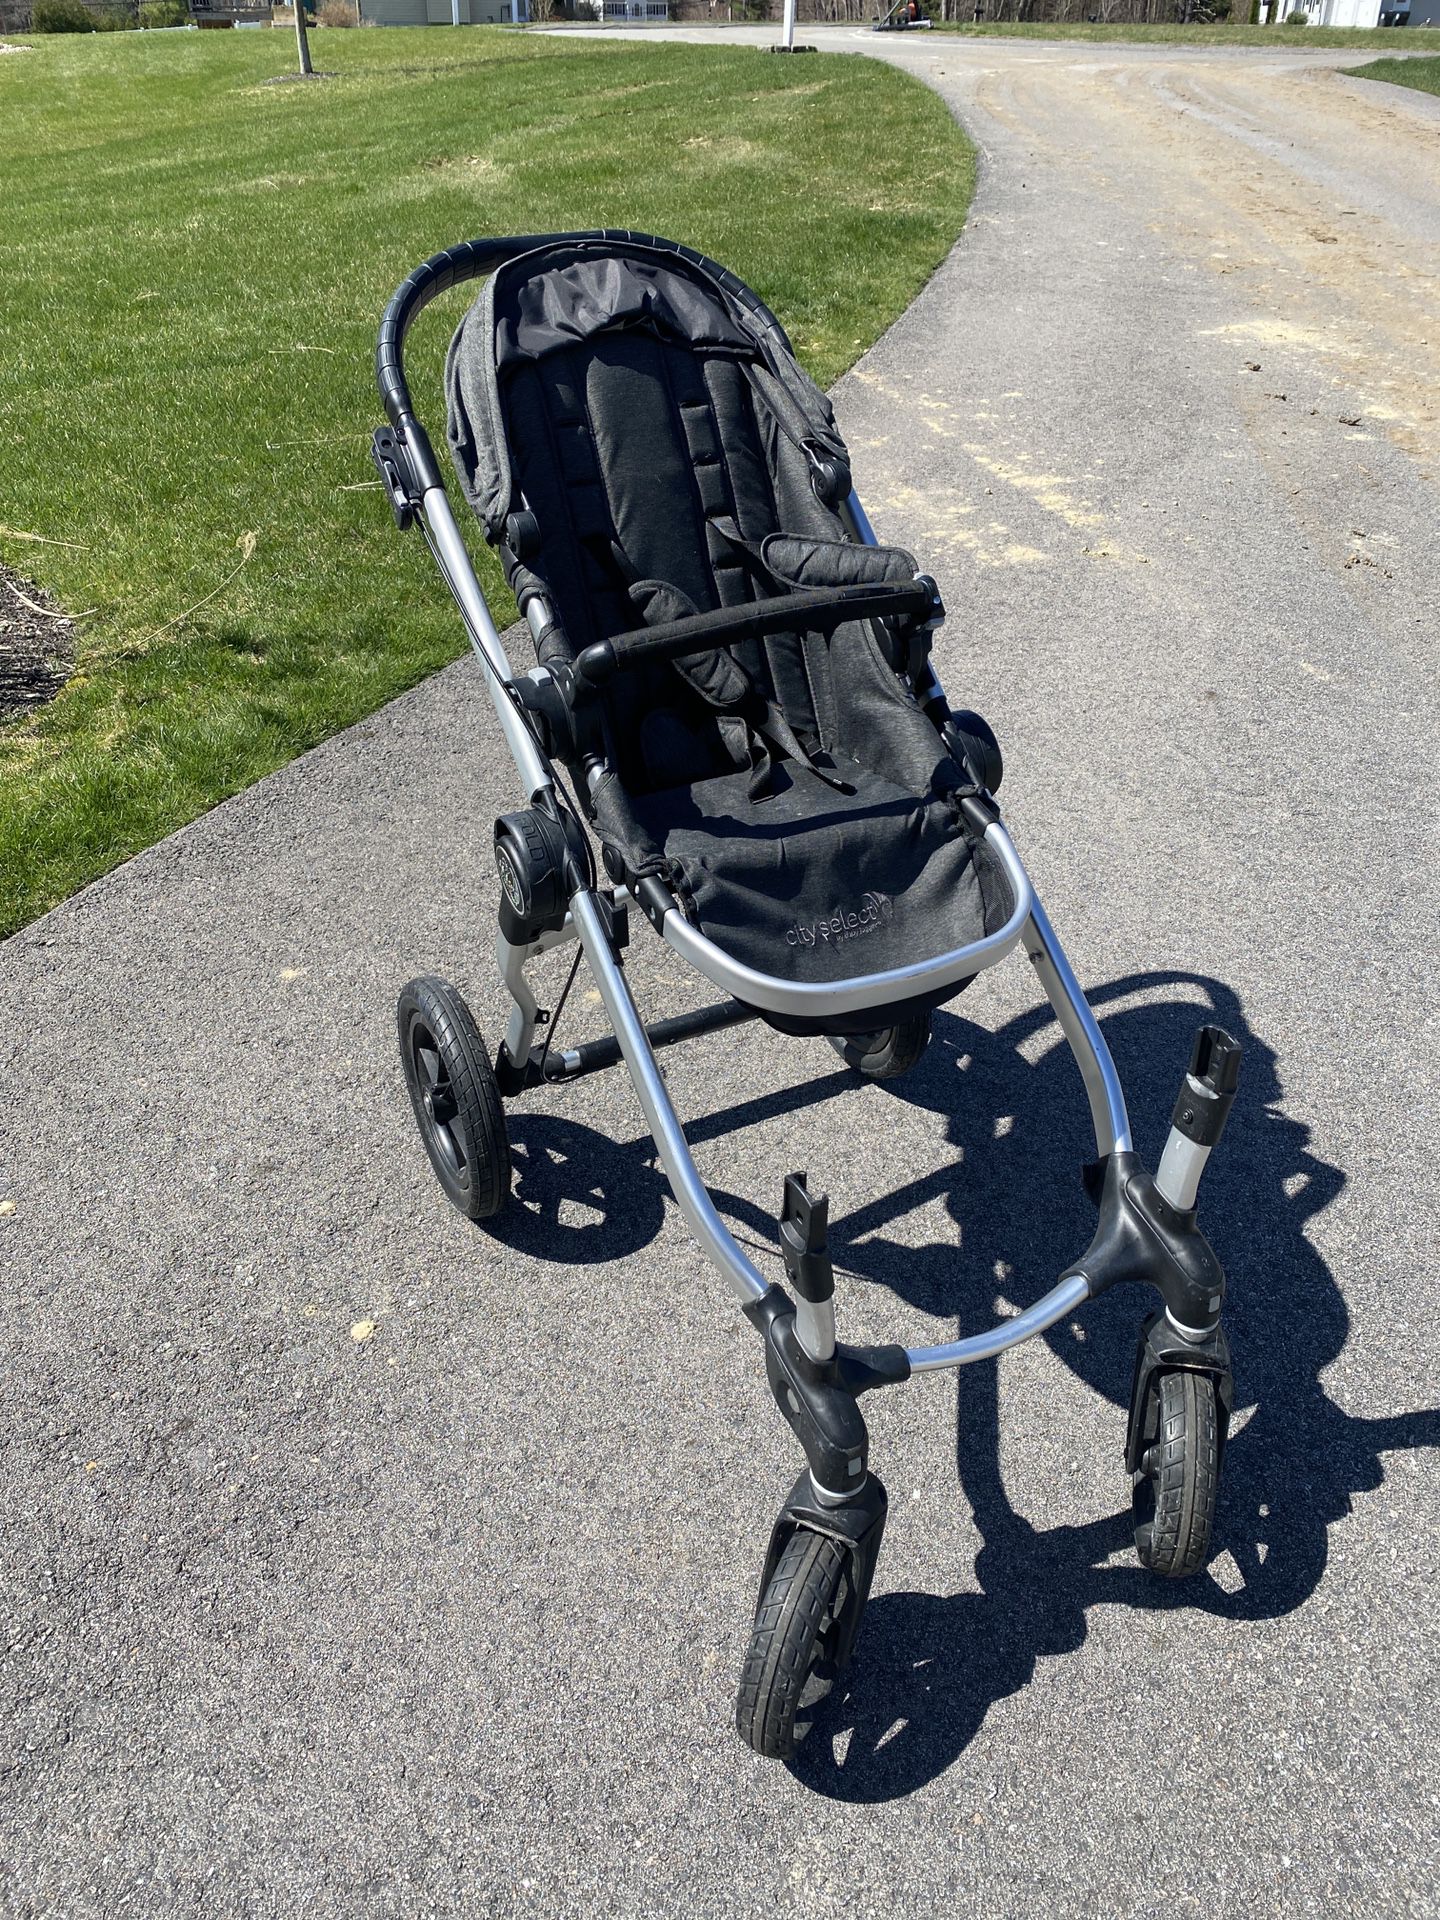 Baby Jogger City Select Double Stroller w/ 1 Seat